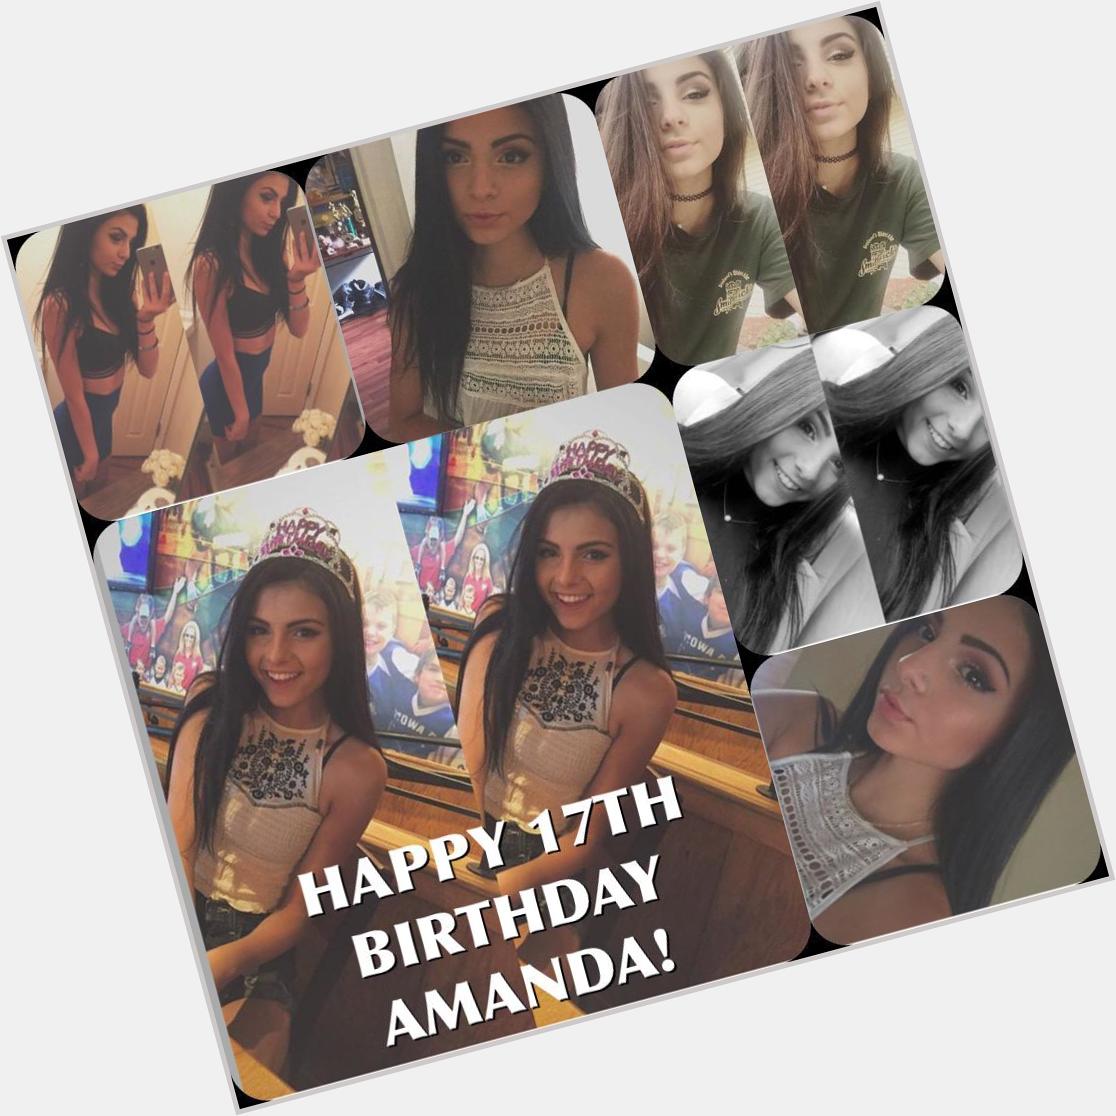  HAPPY 17TH BIRTHDAY AMANDA! Hope you have an amazing day   